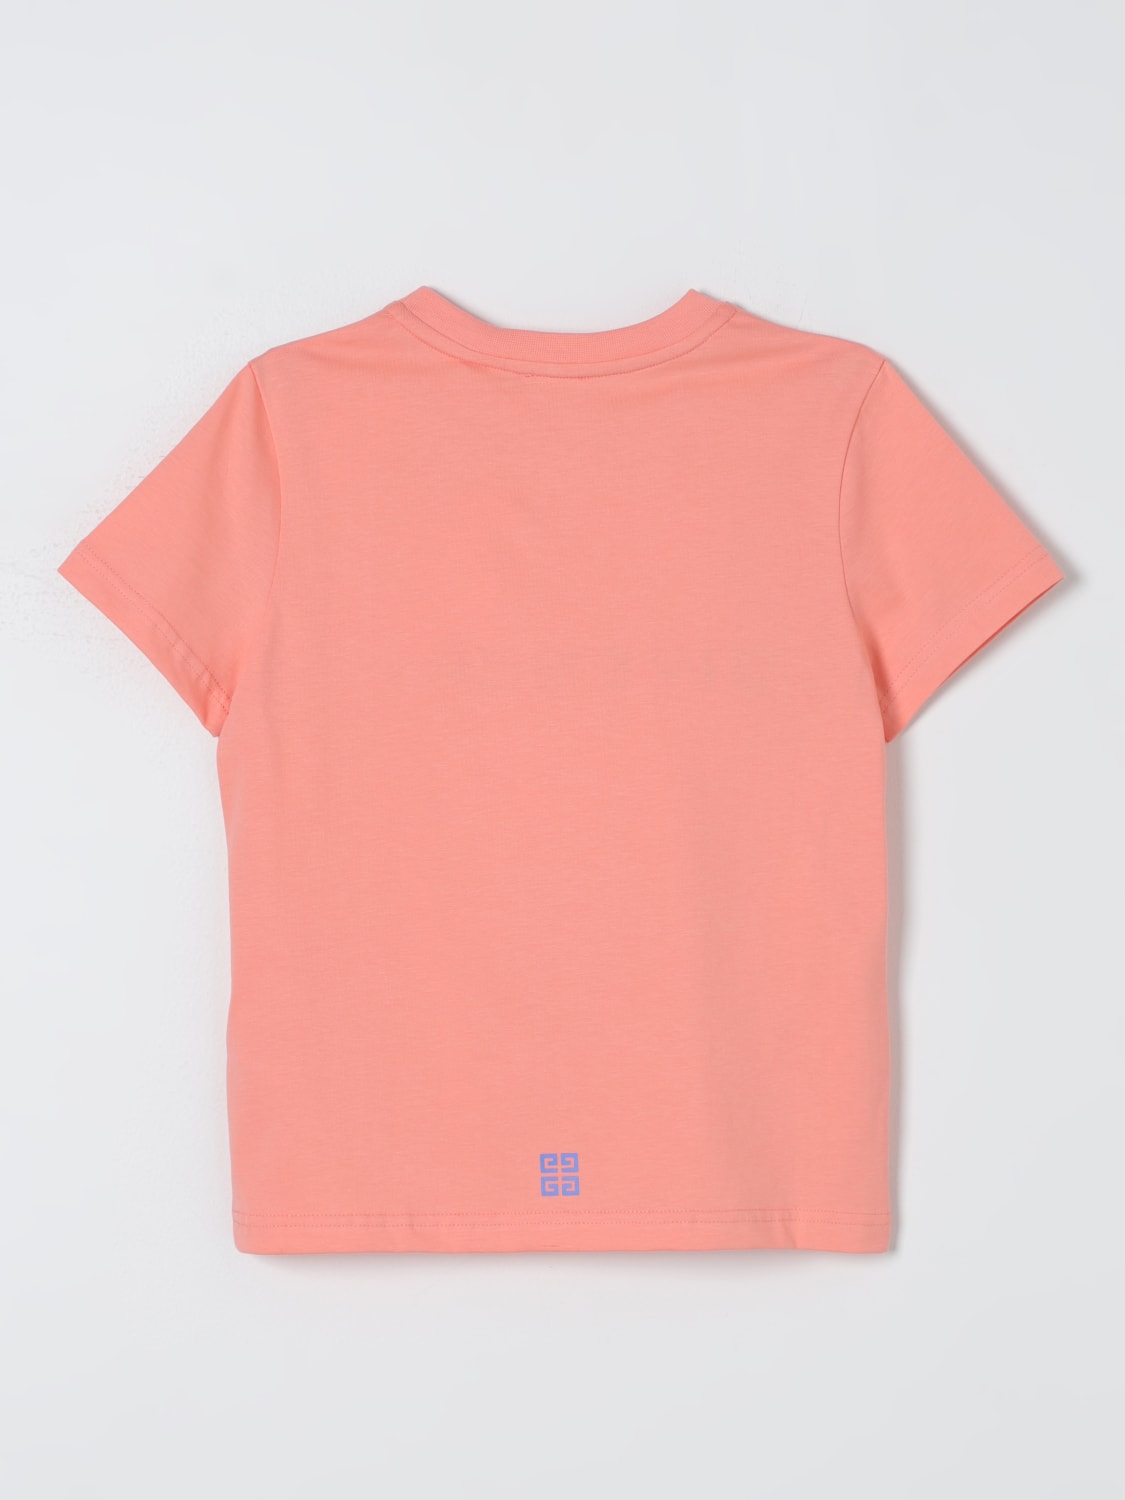 GIVENCHY t-shirt Pink for girls